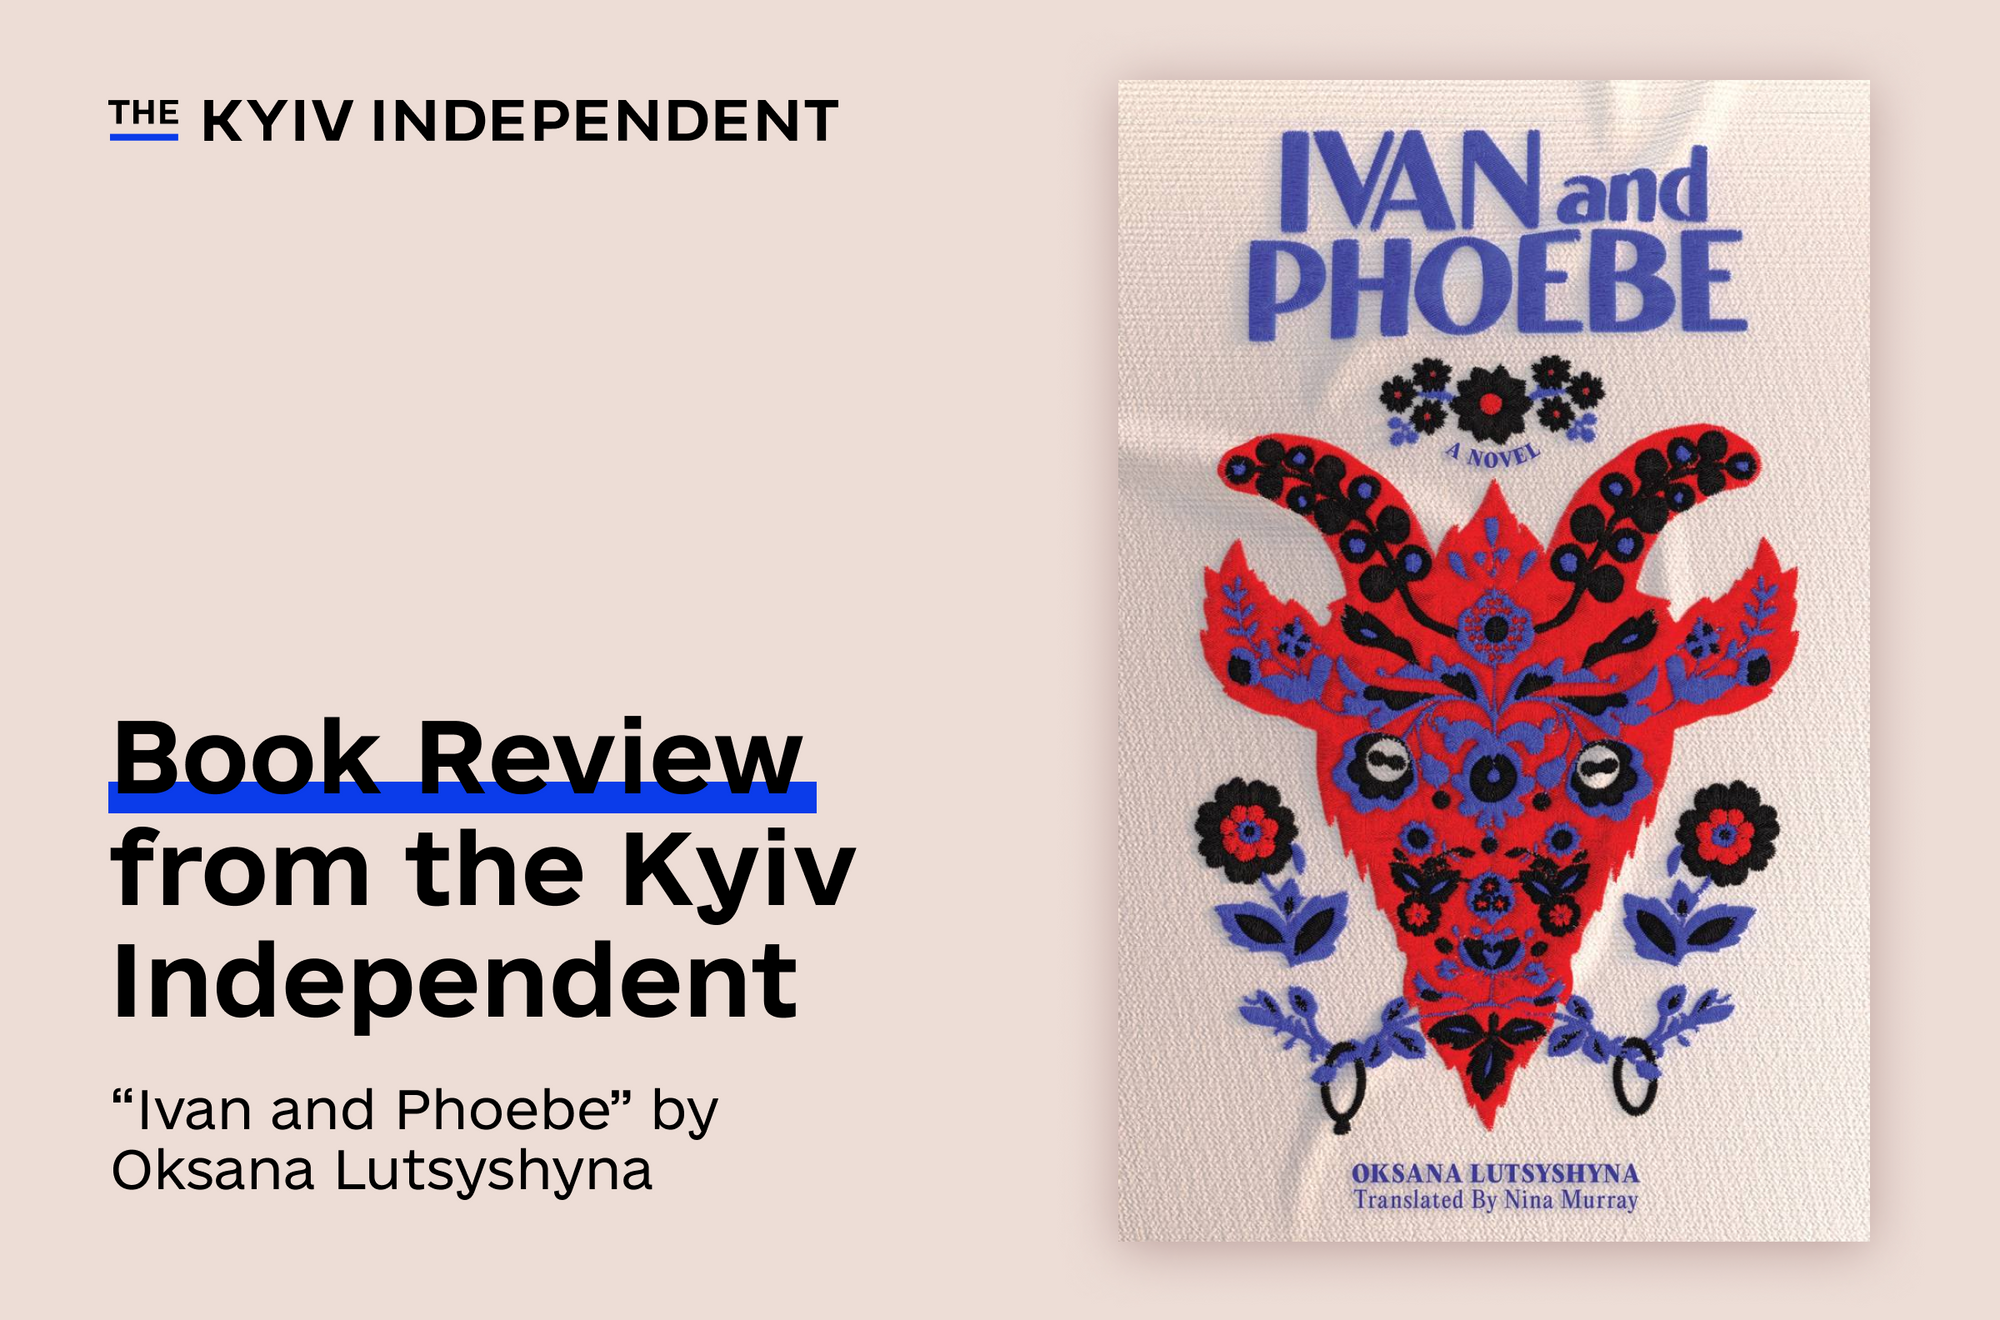 Independent book review